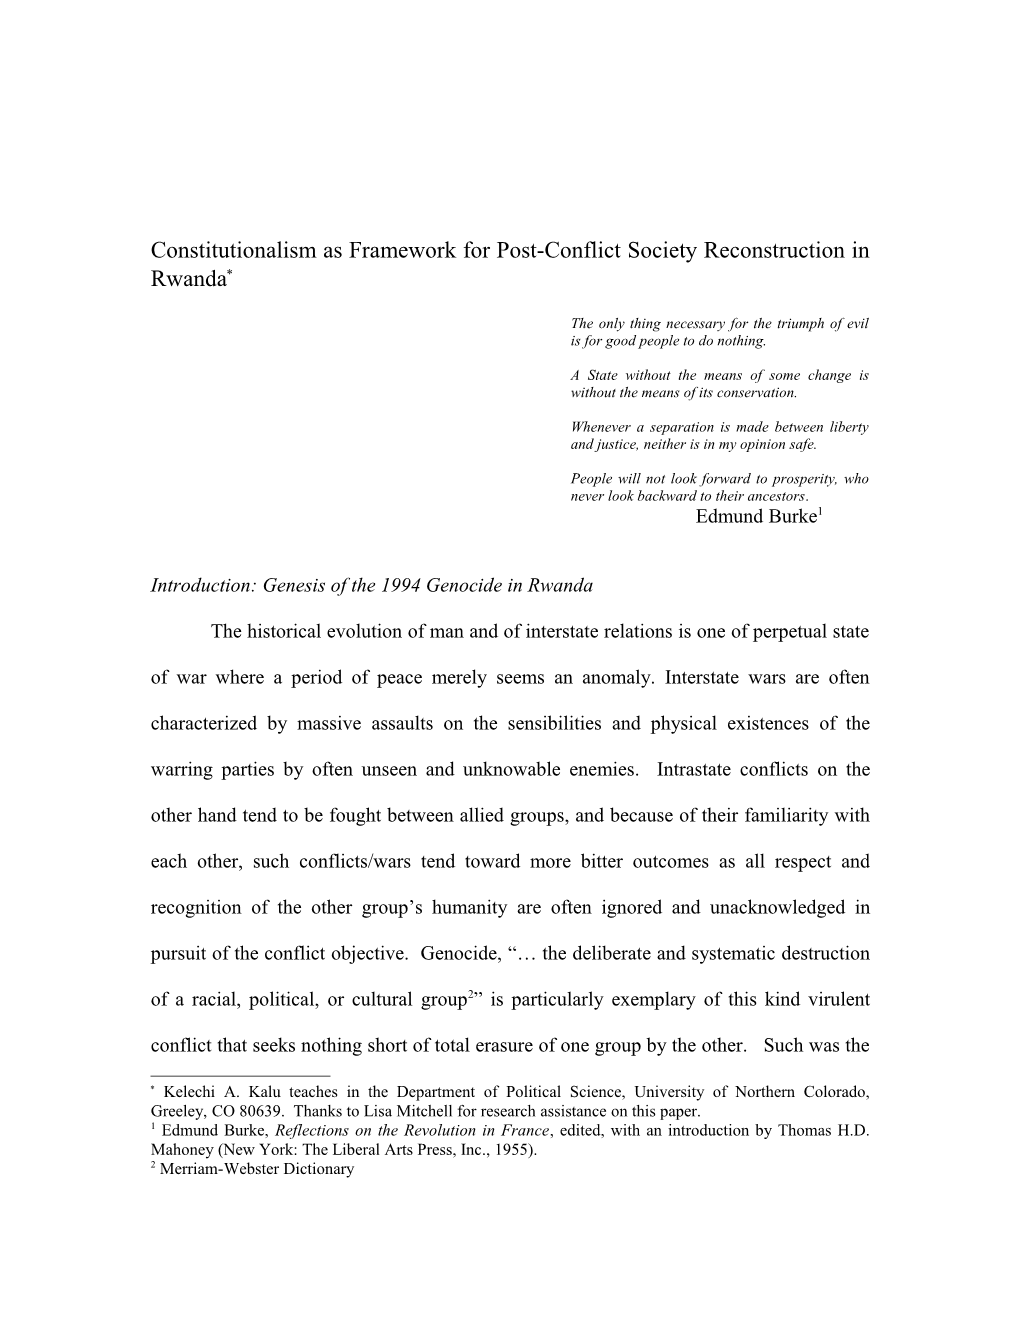 Constitutionalism As Framework for Post-Conflict Society Reconstruction in Rwanda